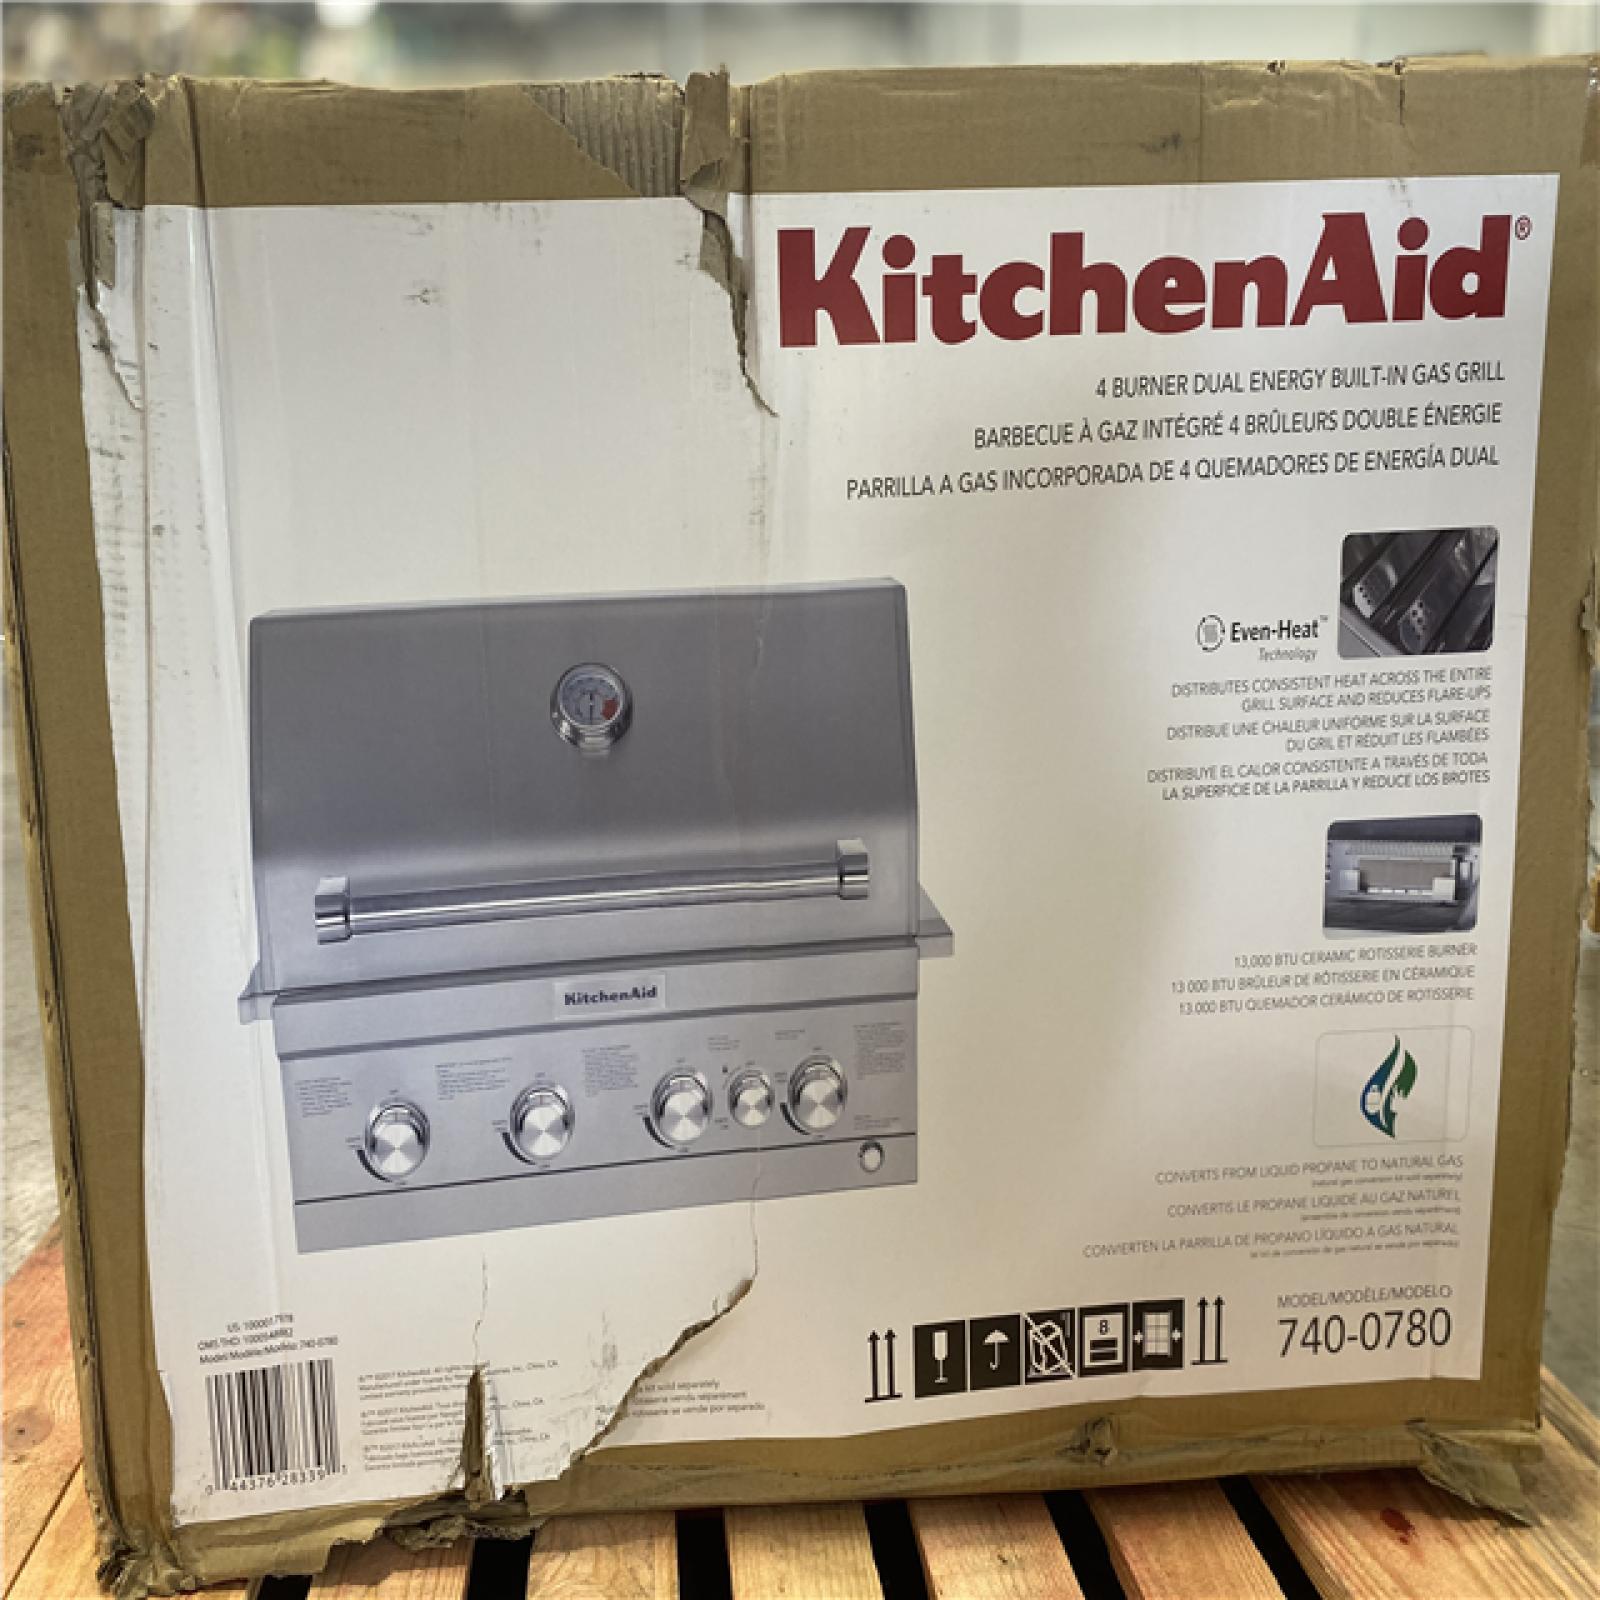 DALLAS LOCATION - KitchenAid 4-Burner Built-in Propane Gas Island Grill Head in Stainless Steel with Rotisserie Burner